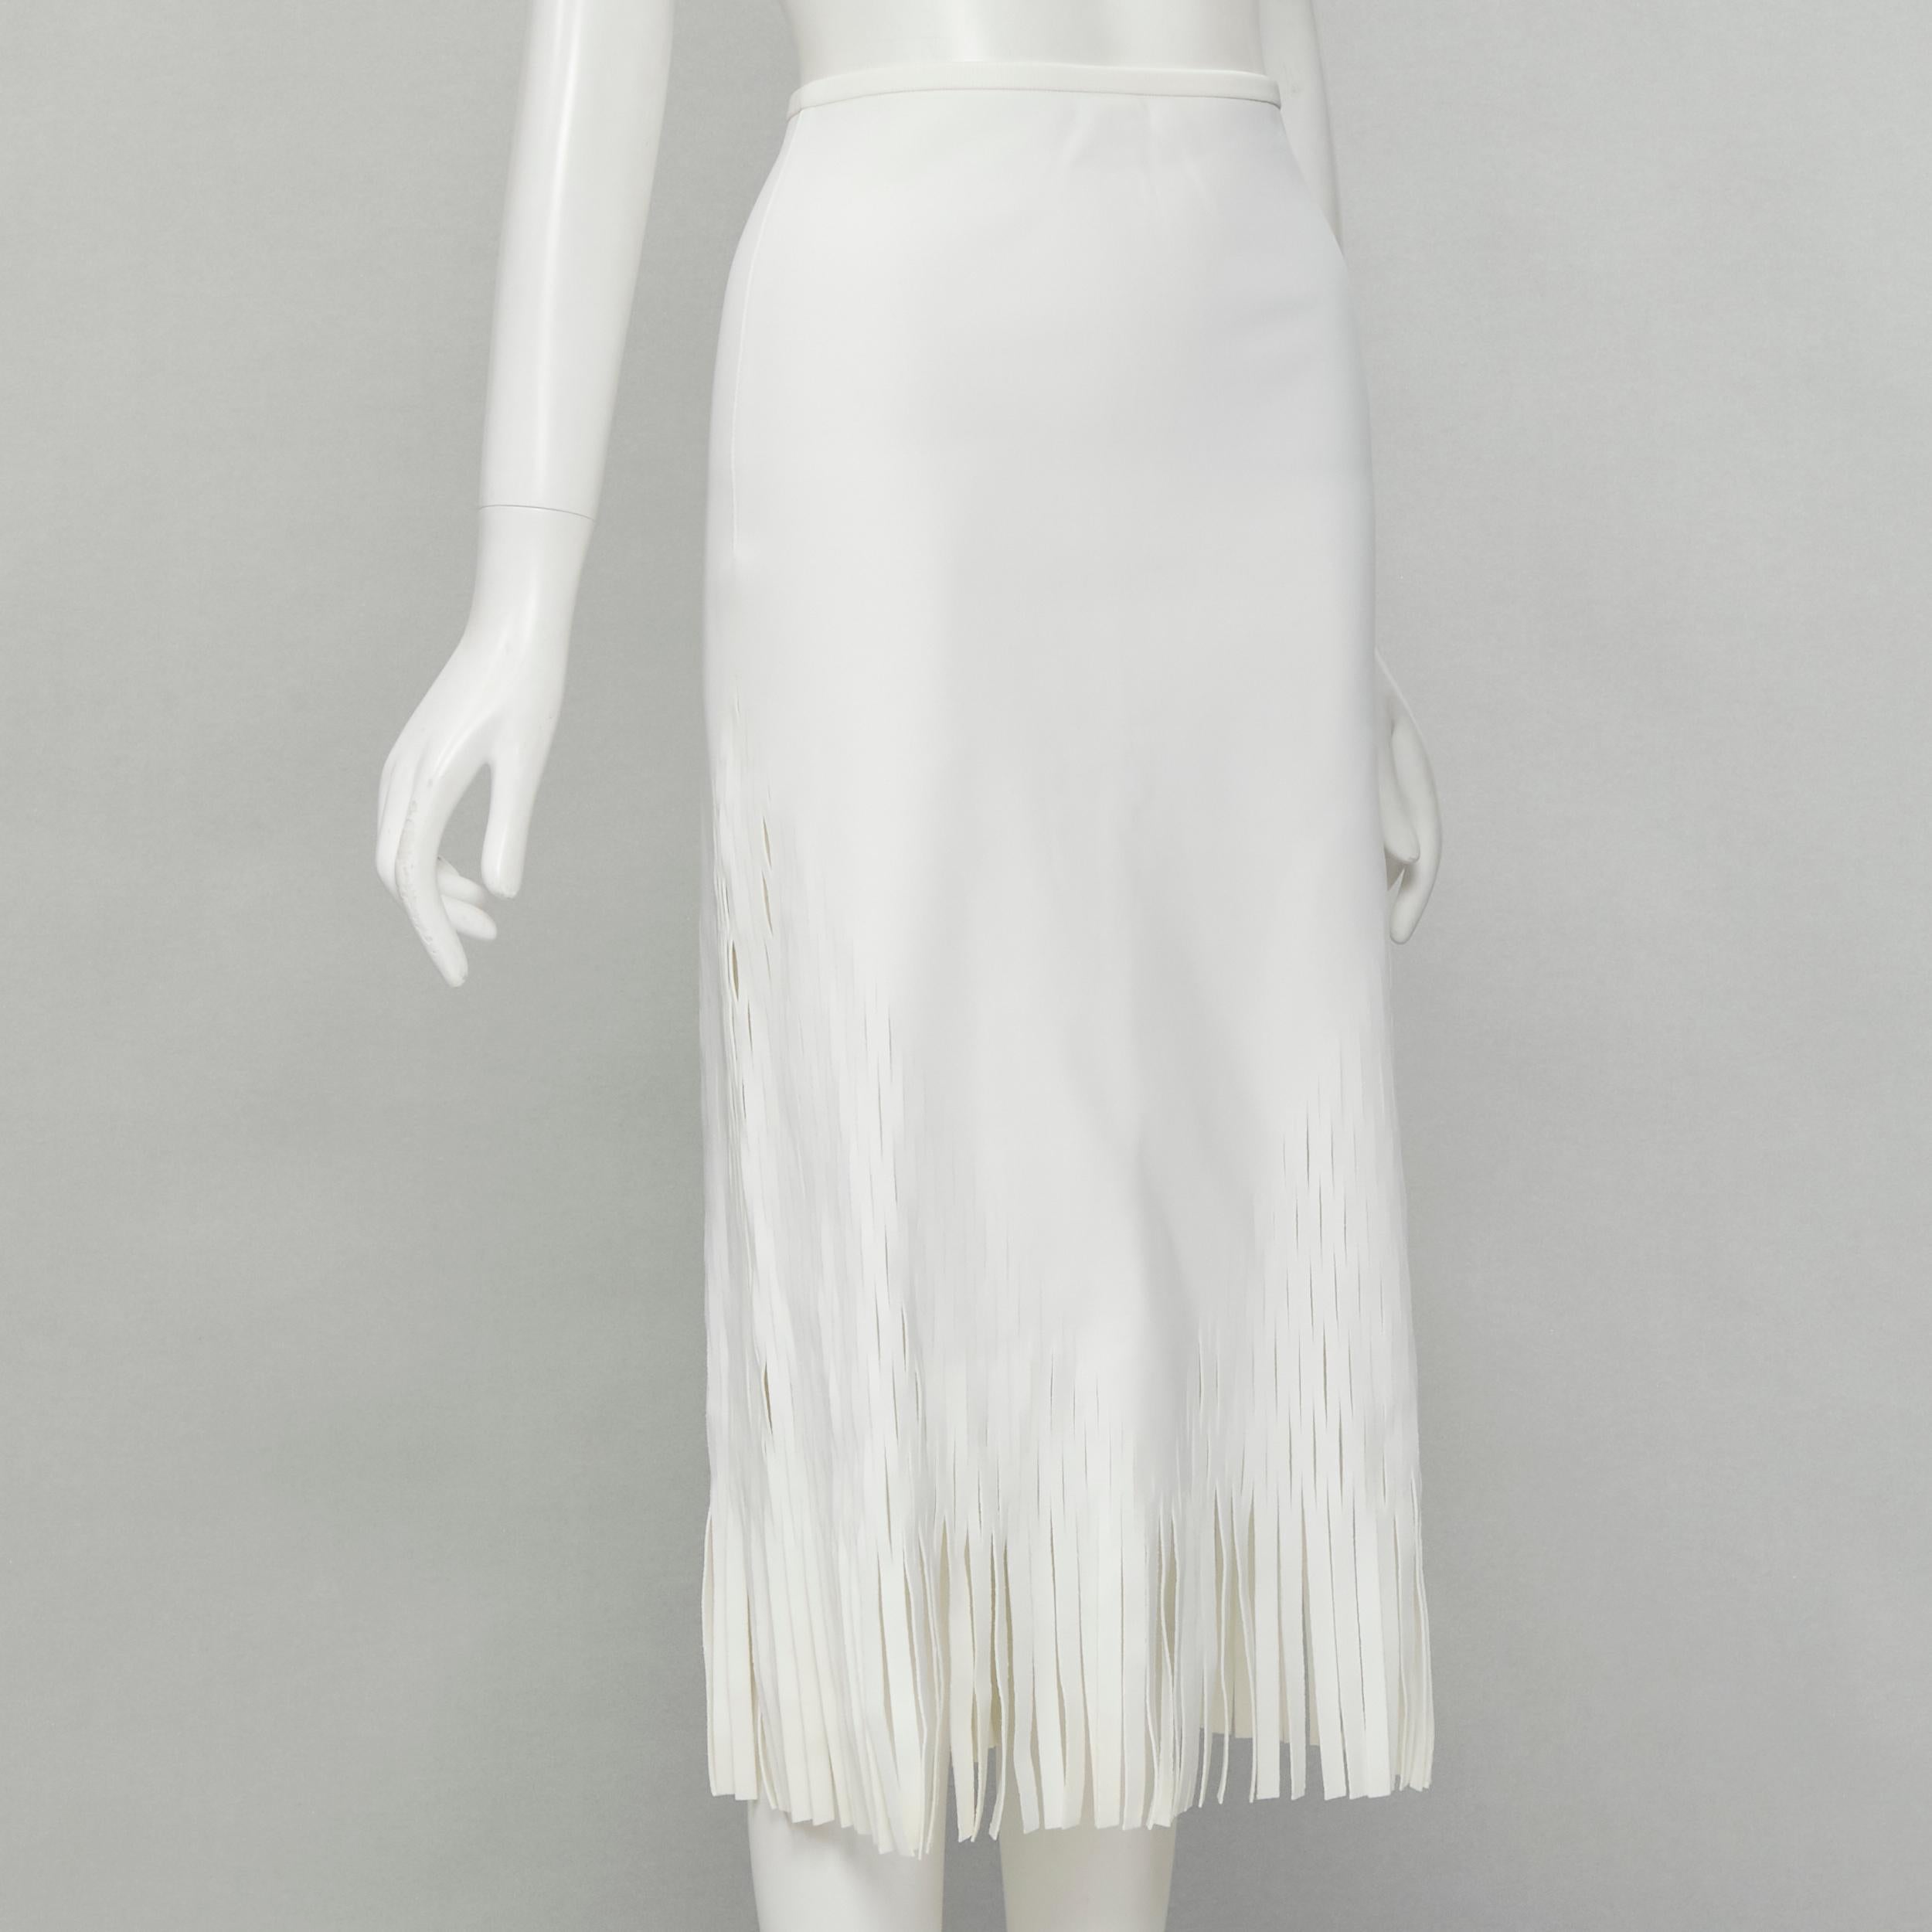 DION LEE white honeycomb cut out fringe hem midi skirt AUS 6 US2 XS
Brand: Dion Lee
Material: Polyester
Color: White
Pattern: Solid
Closure: Half Zip
Made in: Australia

CONDITION:
Condition: Excellent, this item was pre-owned and is in excellent